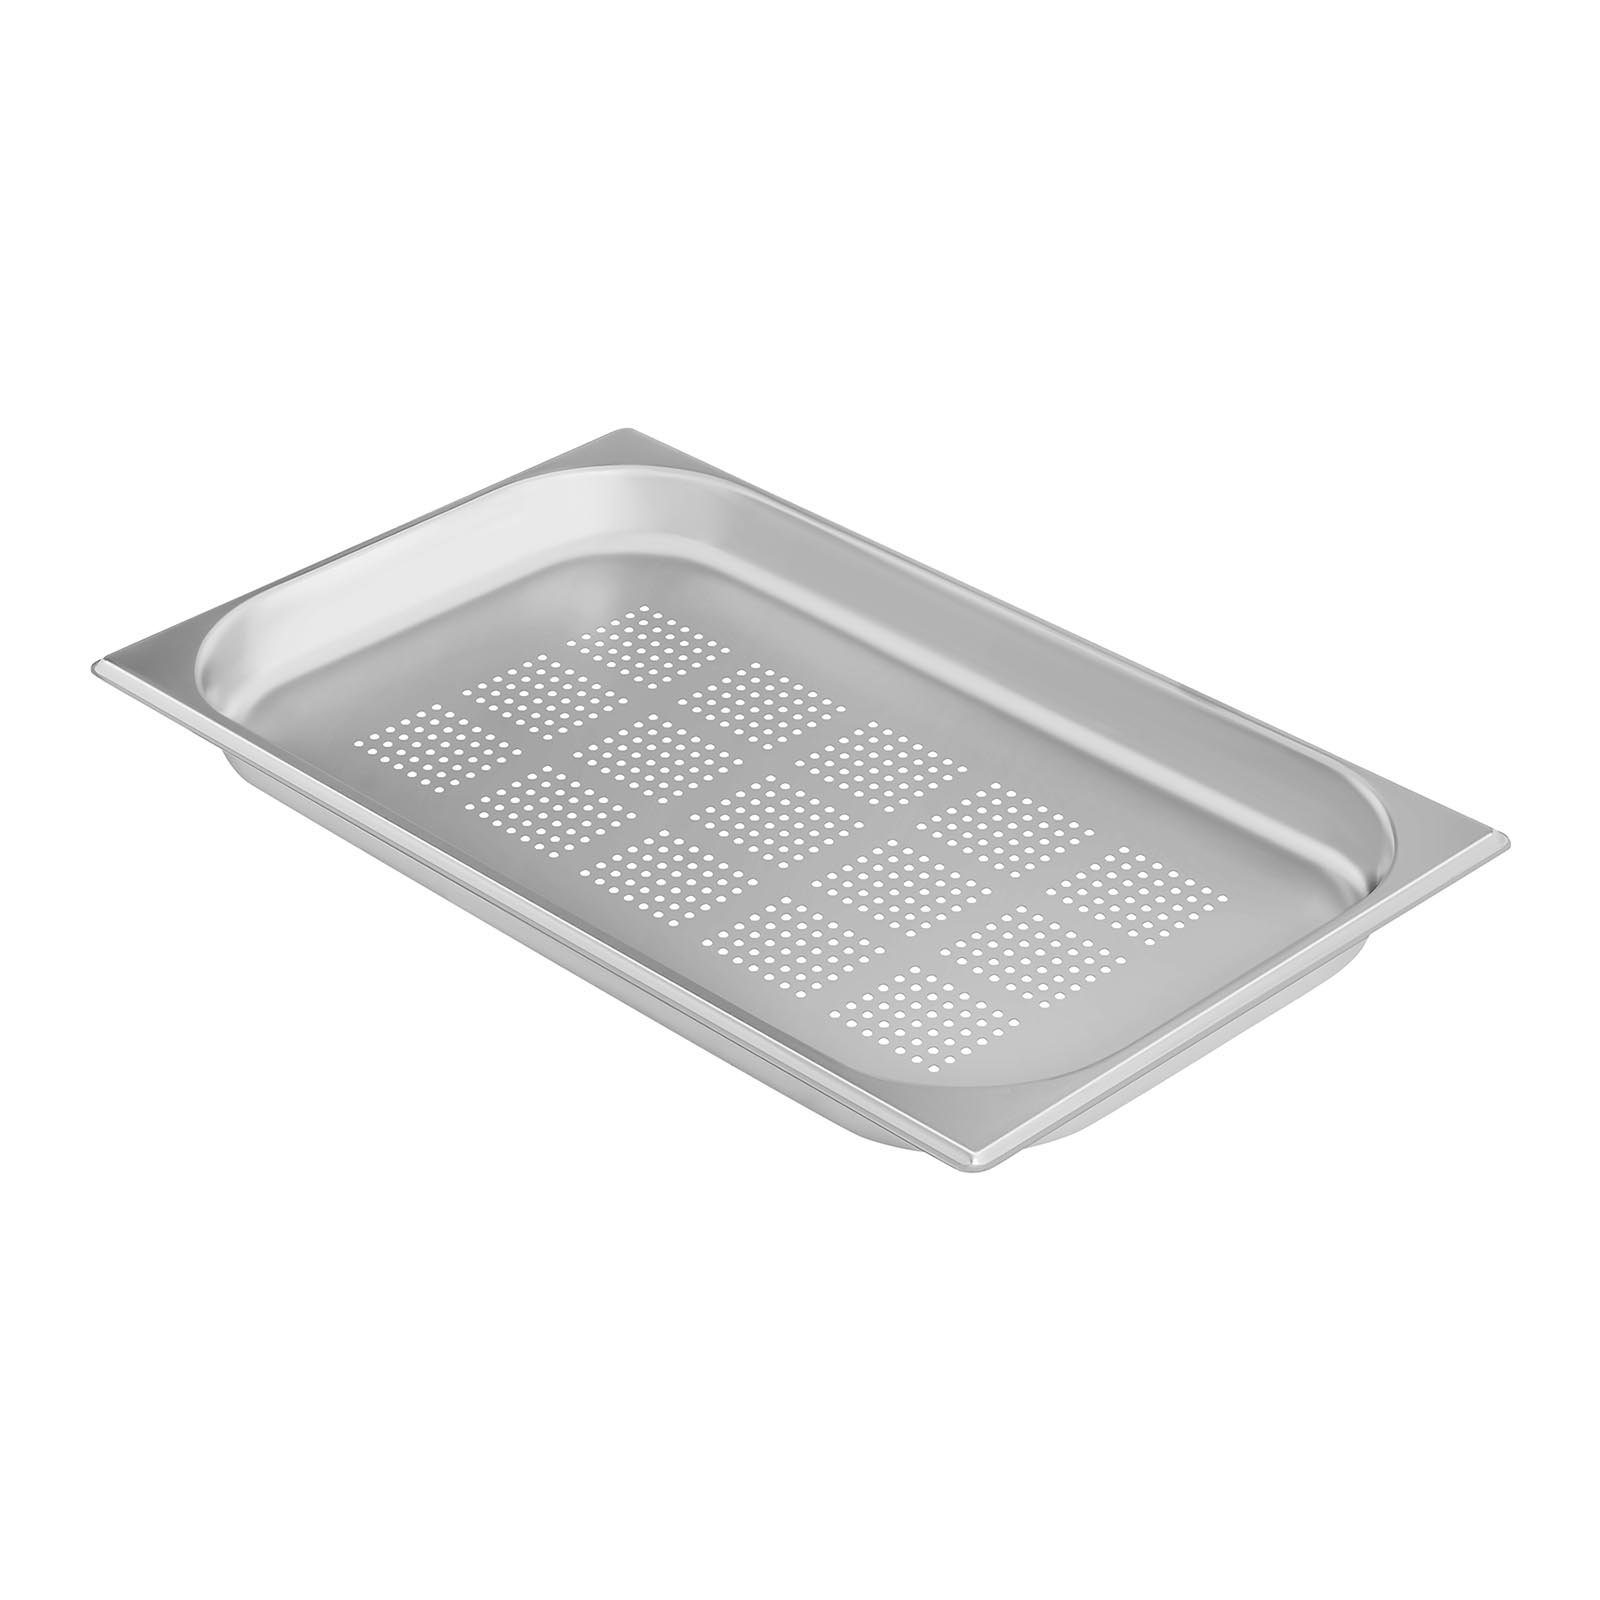 Royal Catering Thermobehälter GN-Behälter Gastronorm Gastronormbehälter GN 1/1, perforiert 40 mm, Edelstahl